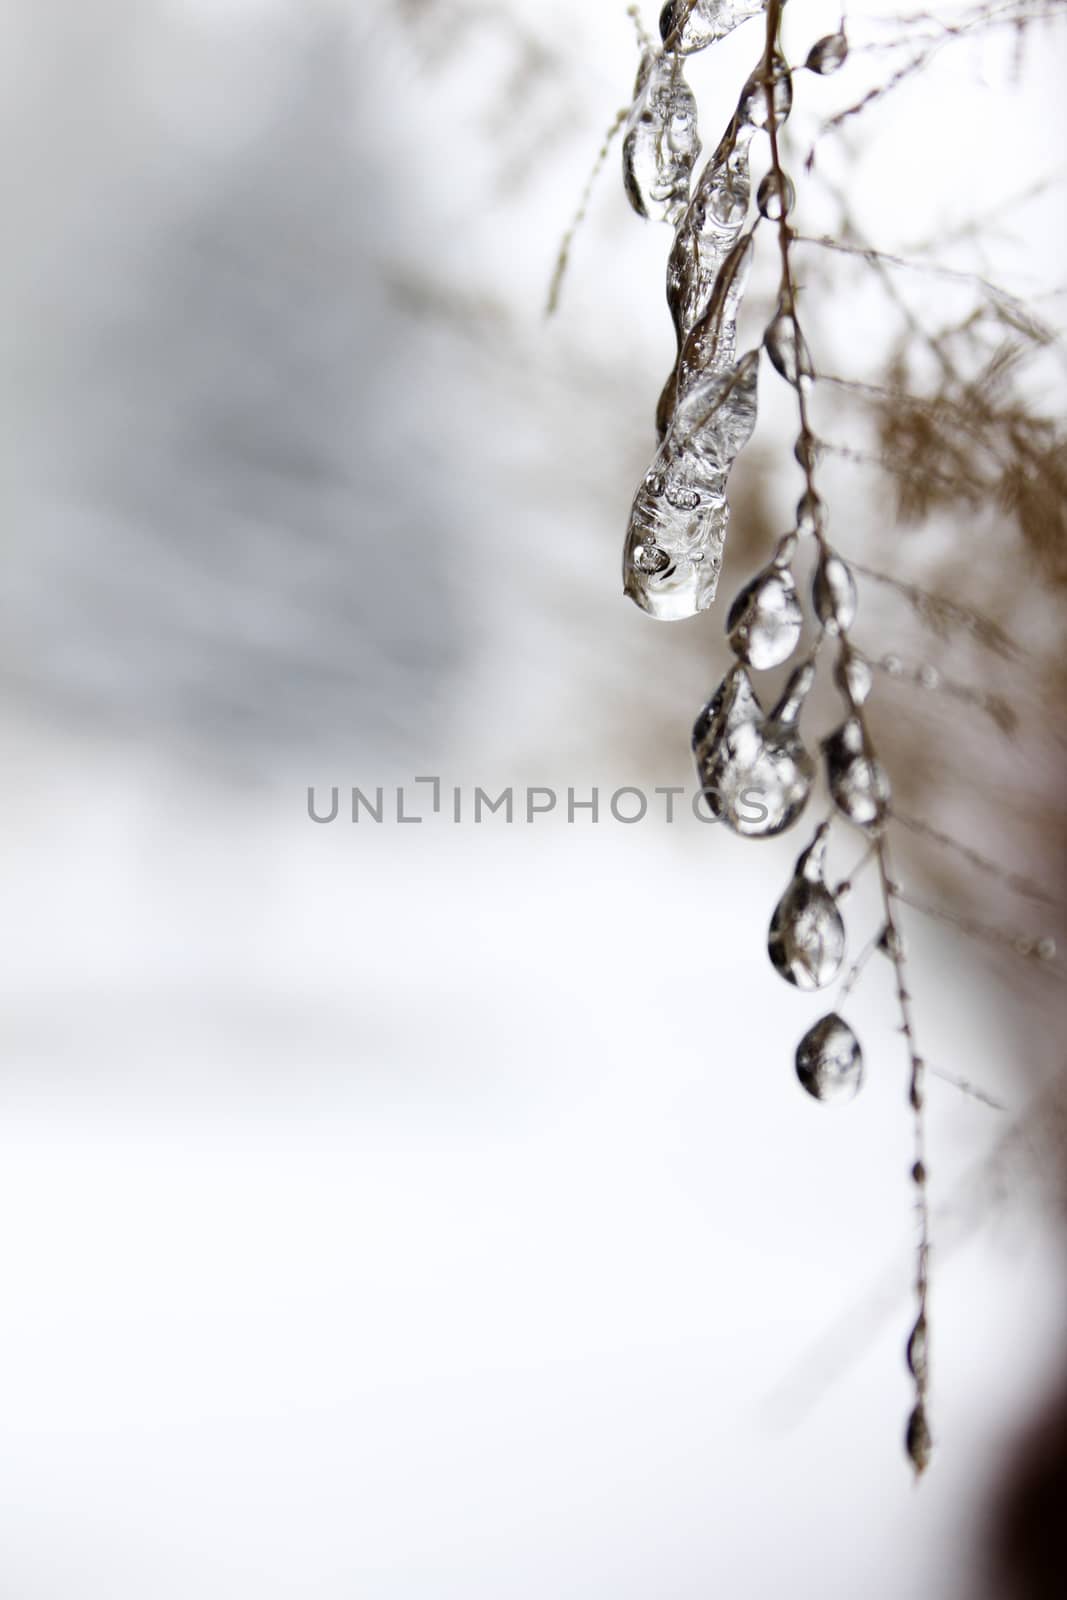 Frozen droplets on a twig during cold winter months